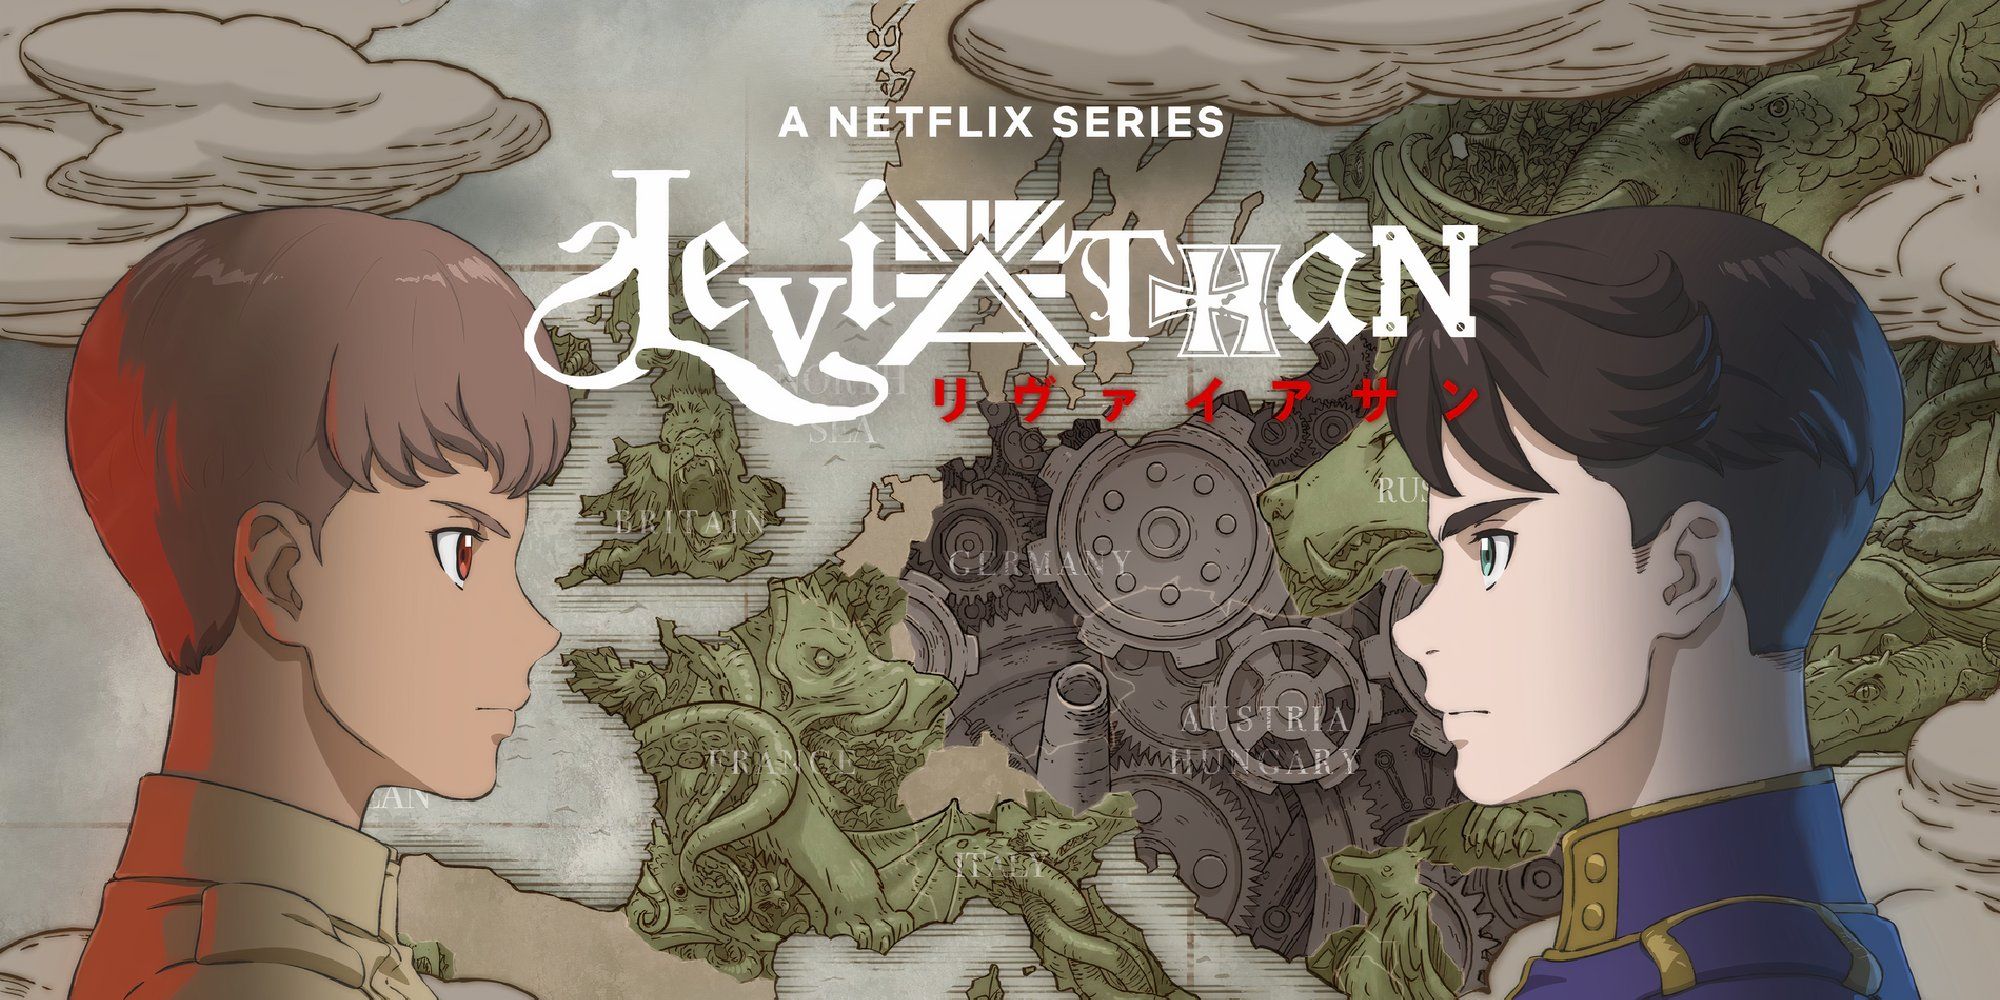 Netflix’s upcoming mecha anime features music from famous Ghibli composer